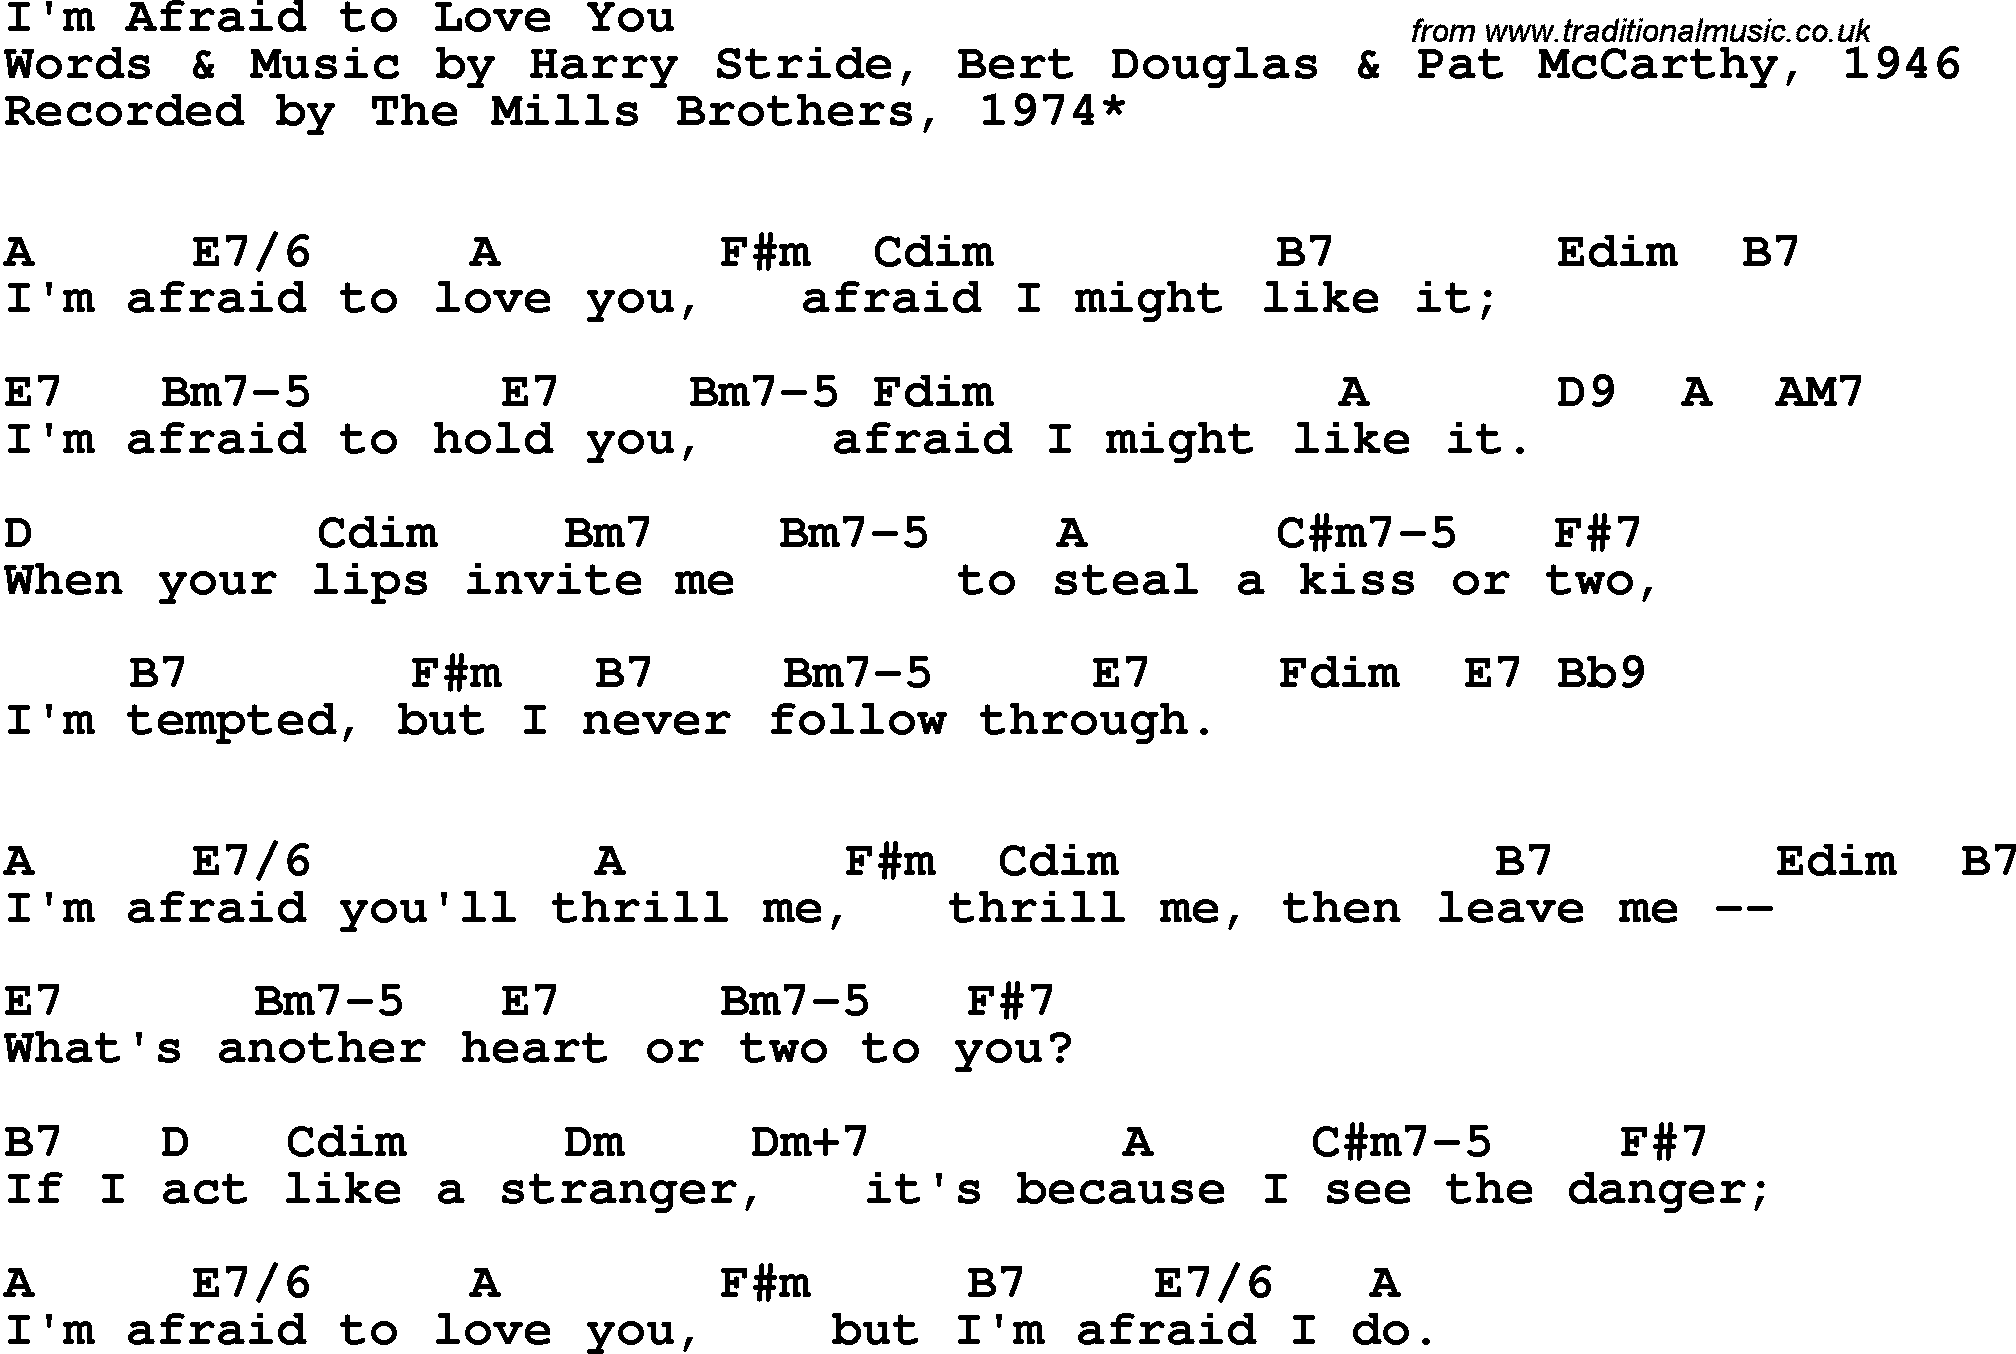 Song Lyrics with guitar chords for I'm Afraid To Love You - The Mills Brothers, 1974